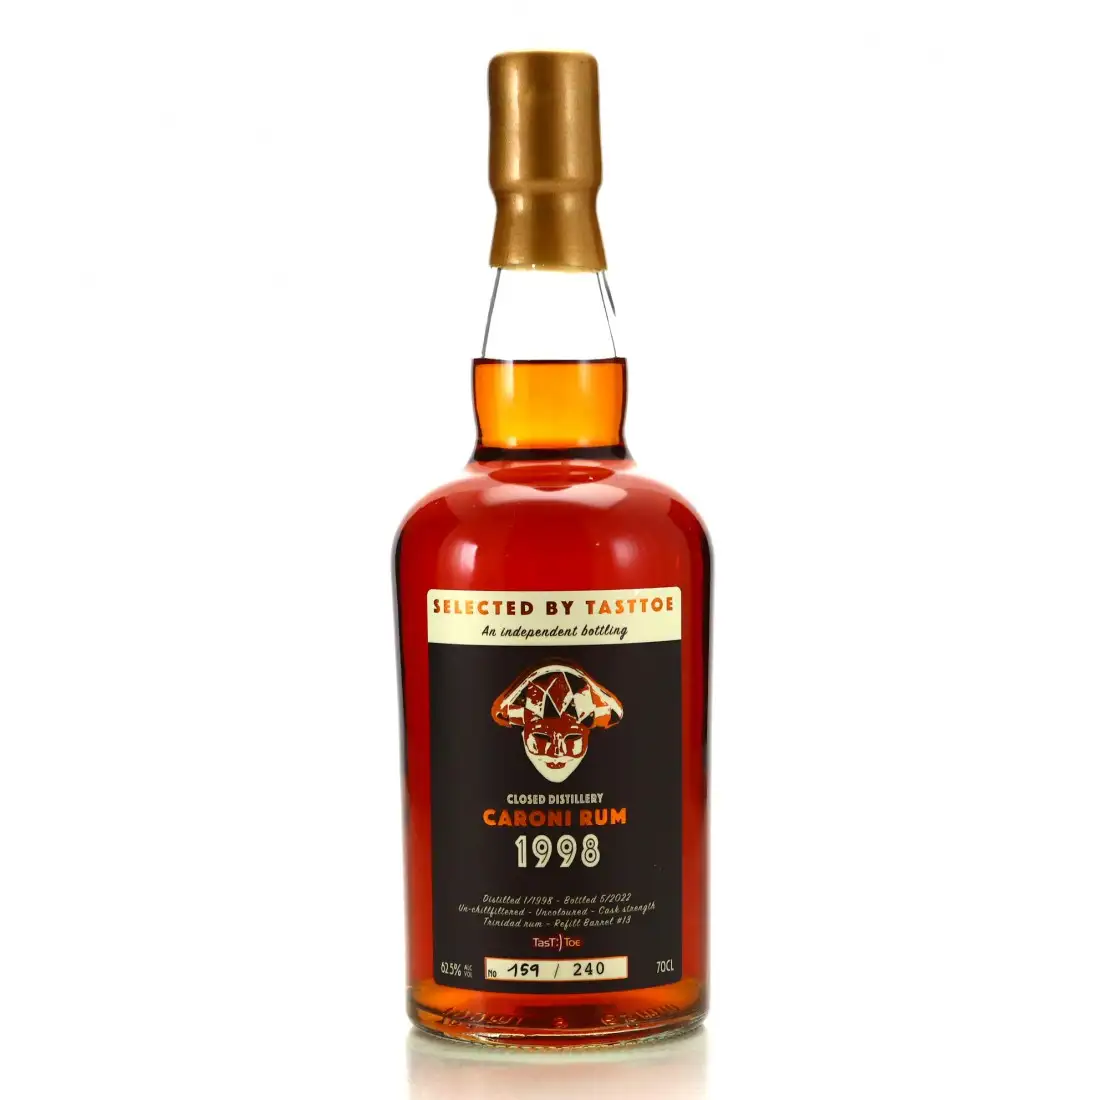 Image of the front of the bottle of the rum Selected by TASTTOE